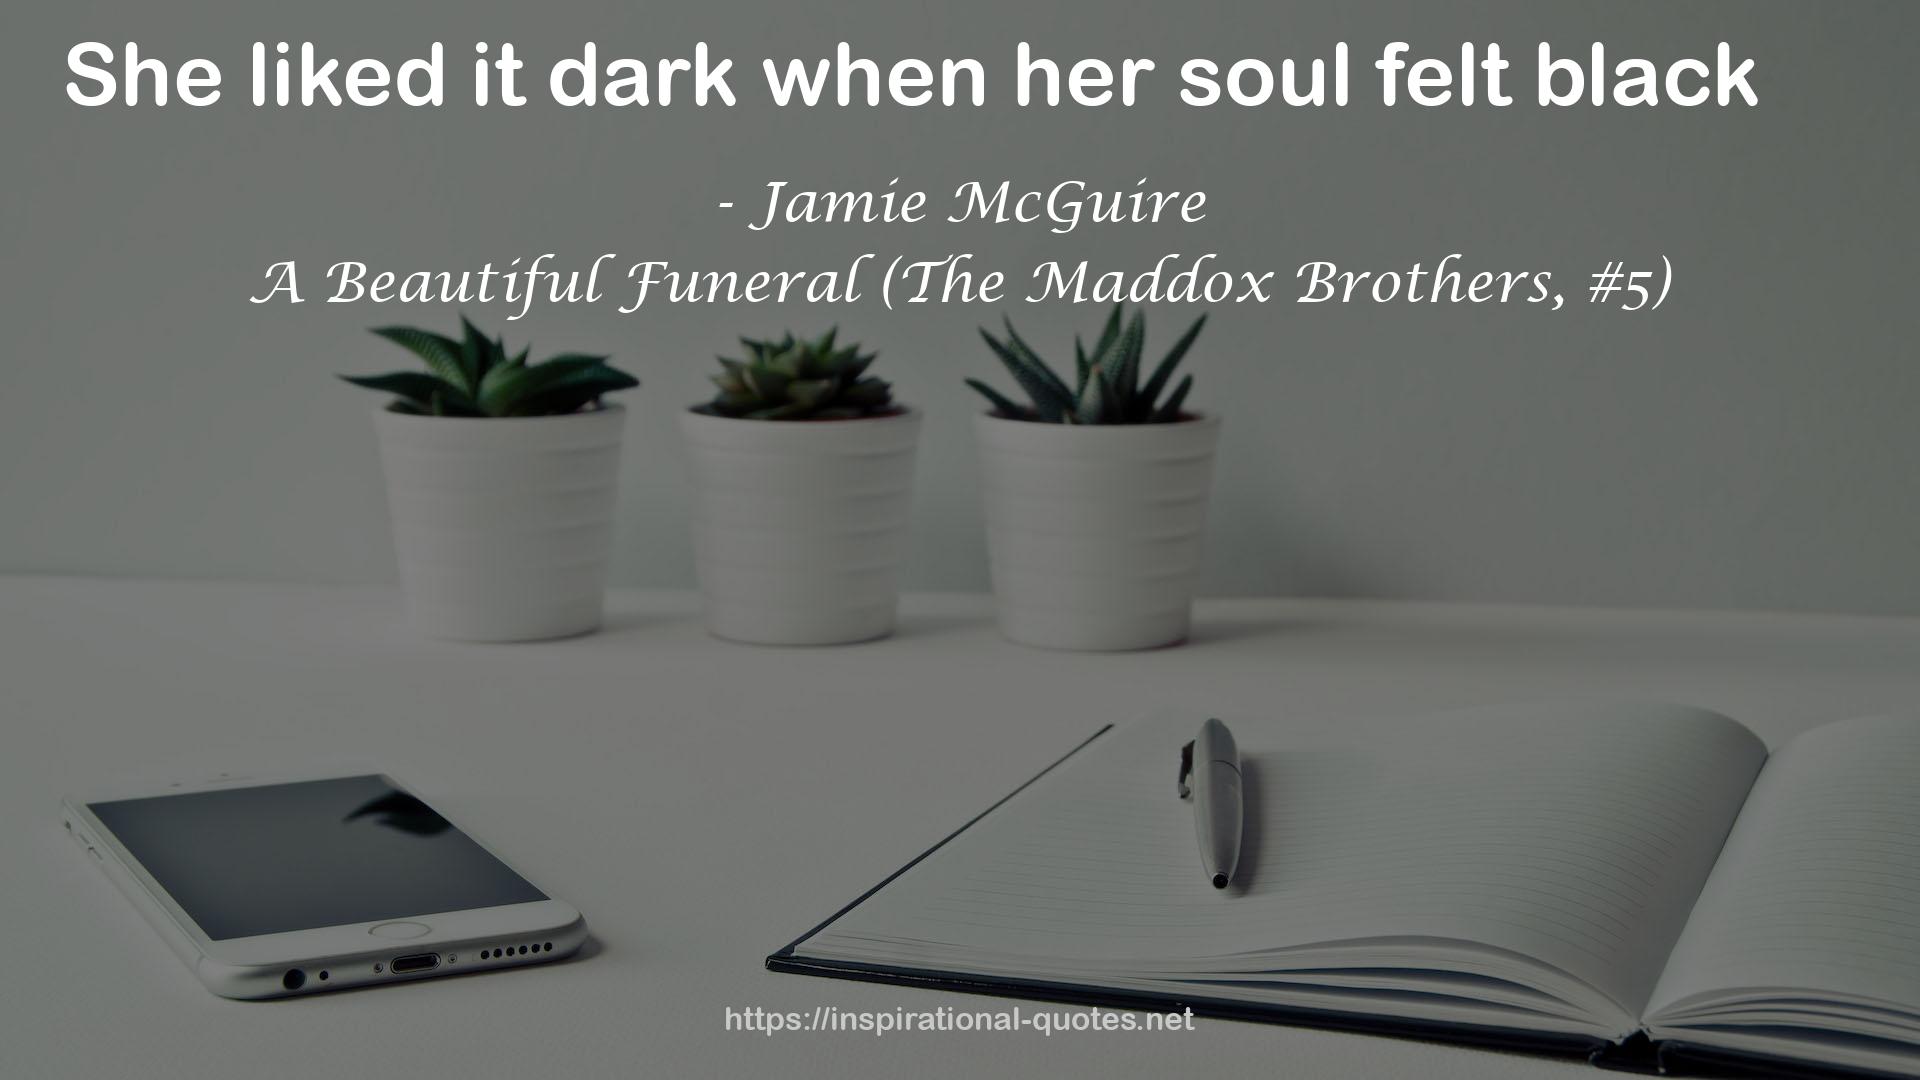 A Beautiful Funeral (The Maddox Brothers, #5) QUOTES